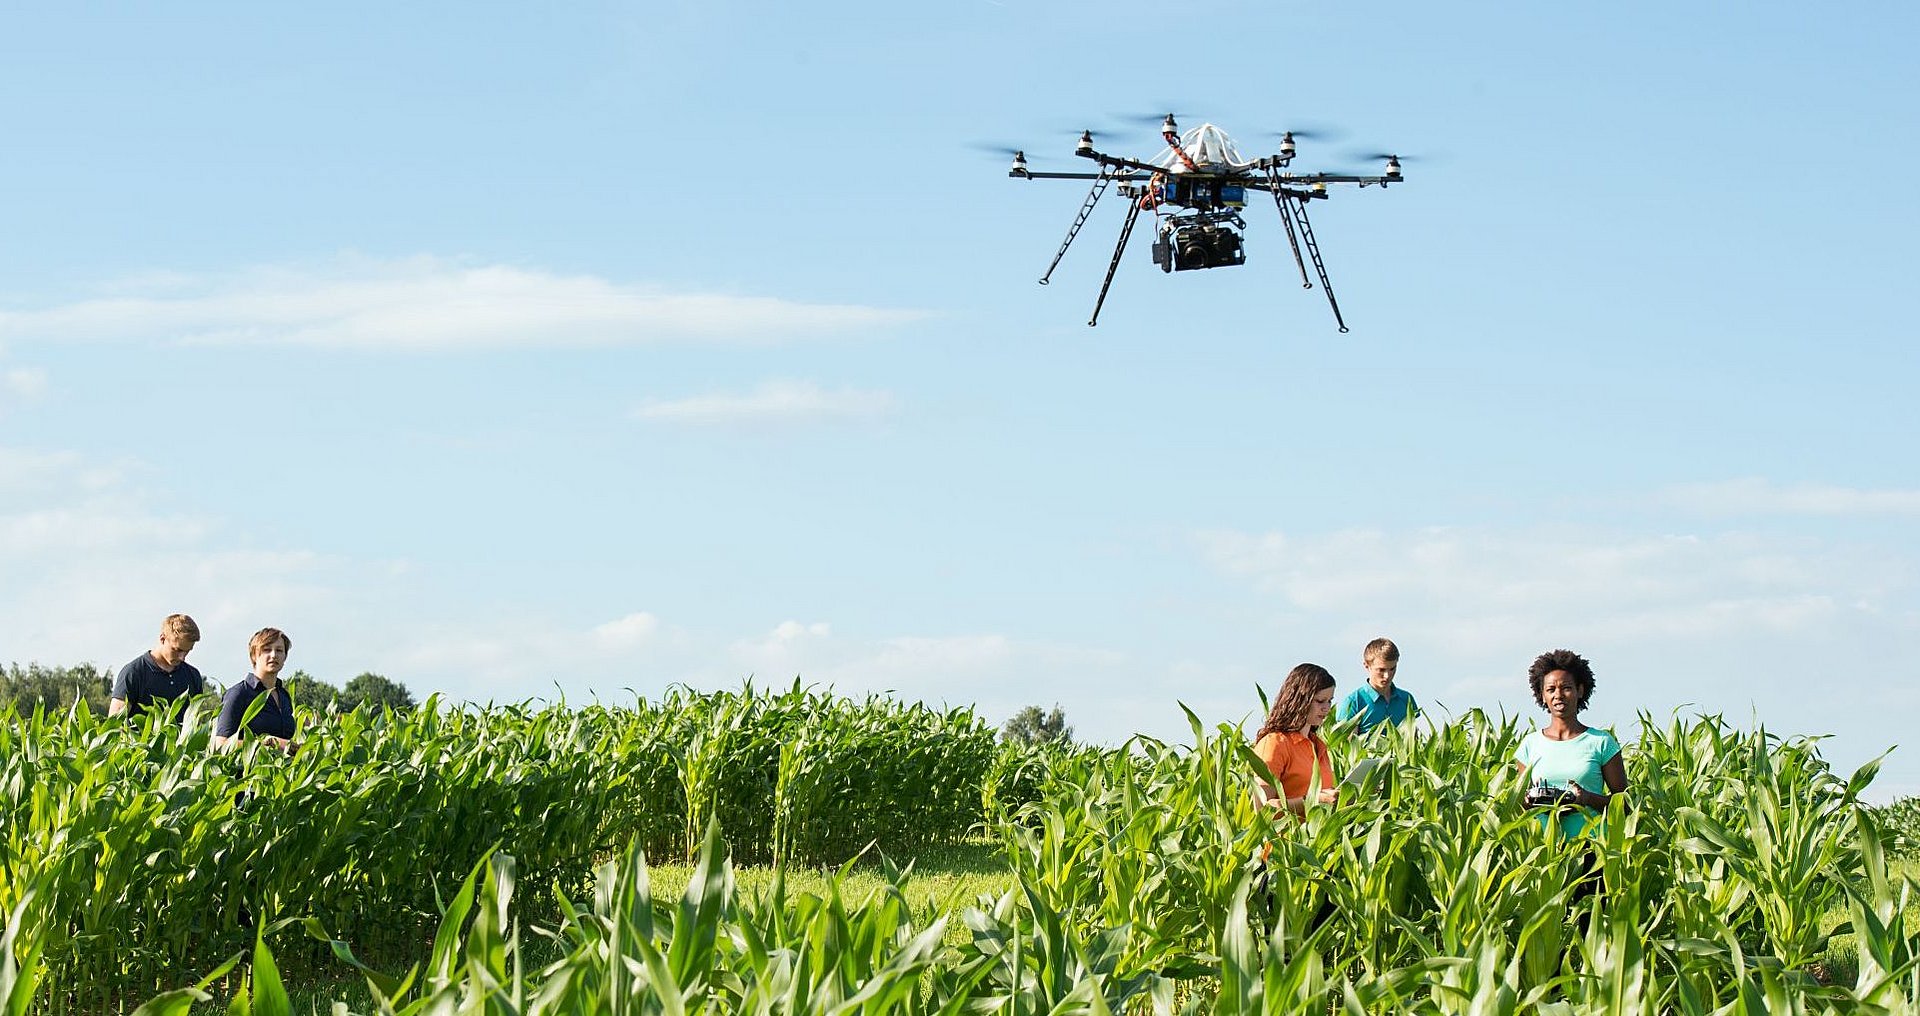 Standing in a cornfield, Technical University of Munich agriculture students operate a drone by remote control.